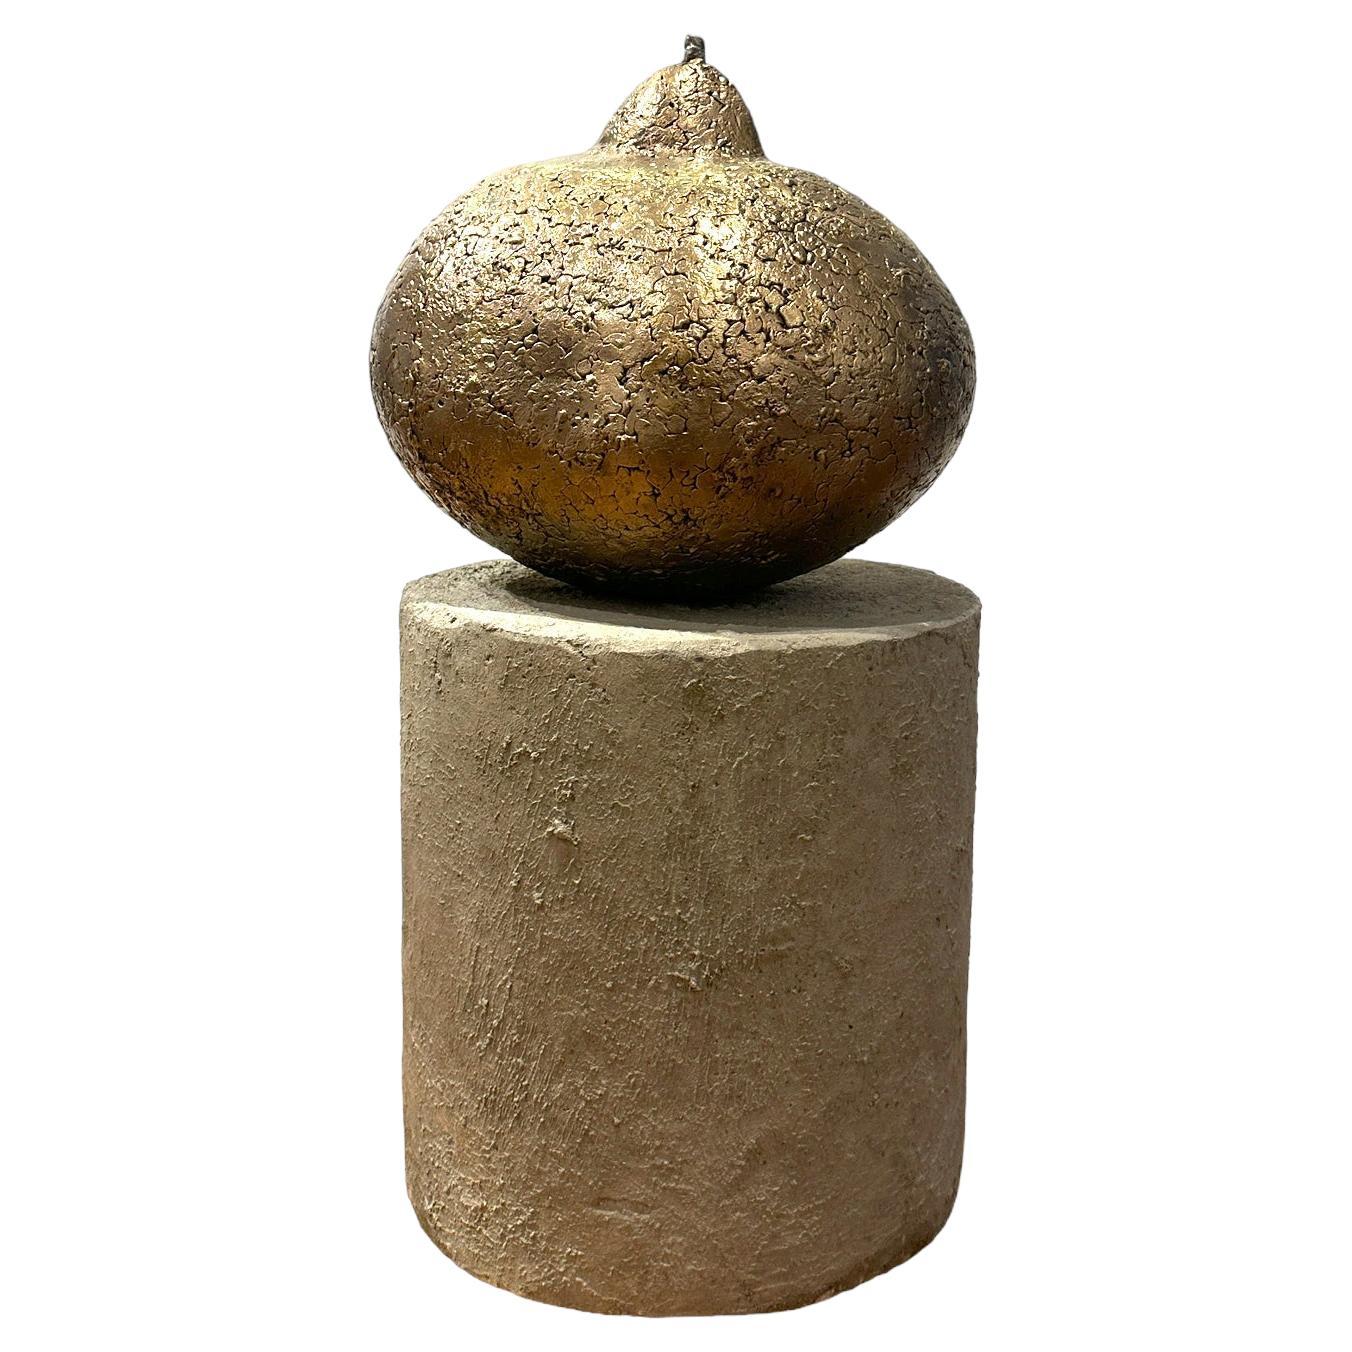 Summer Pear, Bronze Sculpture with Textured Golden Surface on Concrete Base For Sale